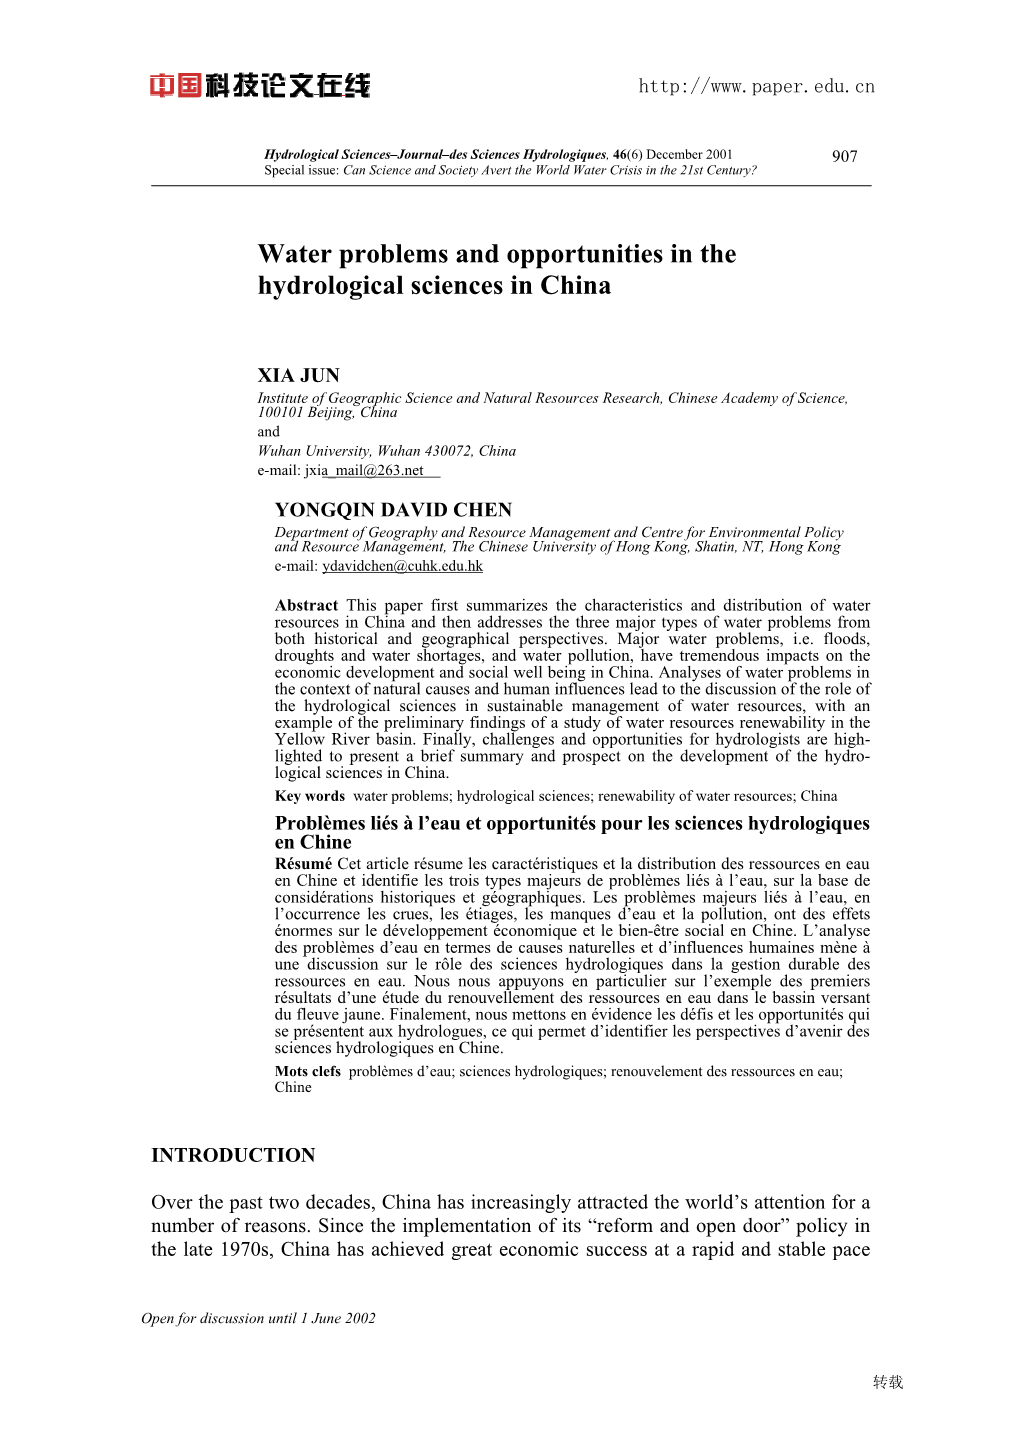 Water Problems and Opportunities in the Hydrological Sciences in China